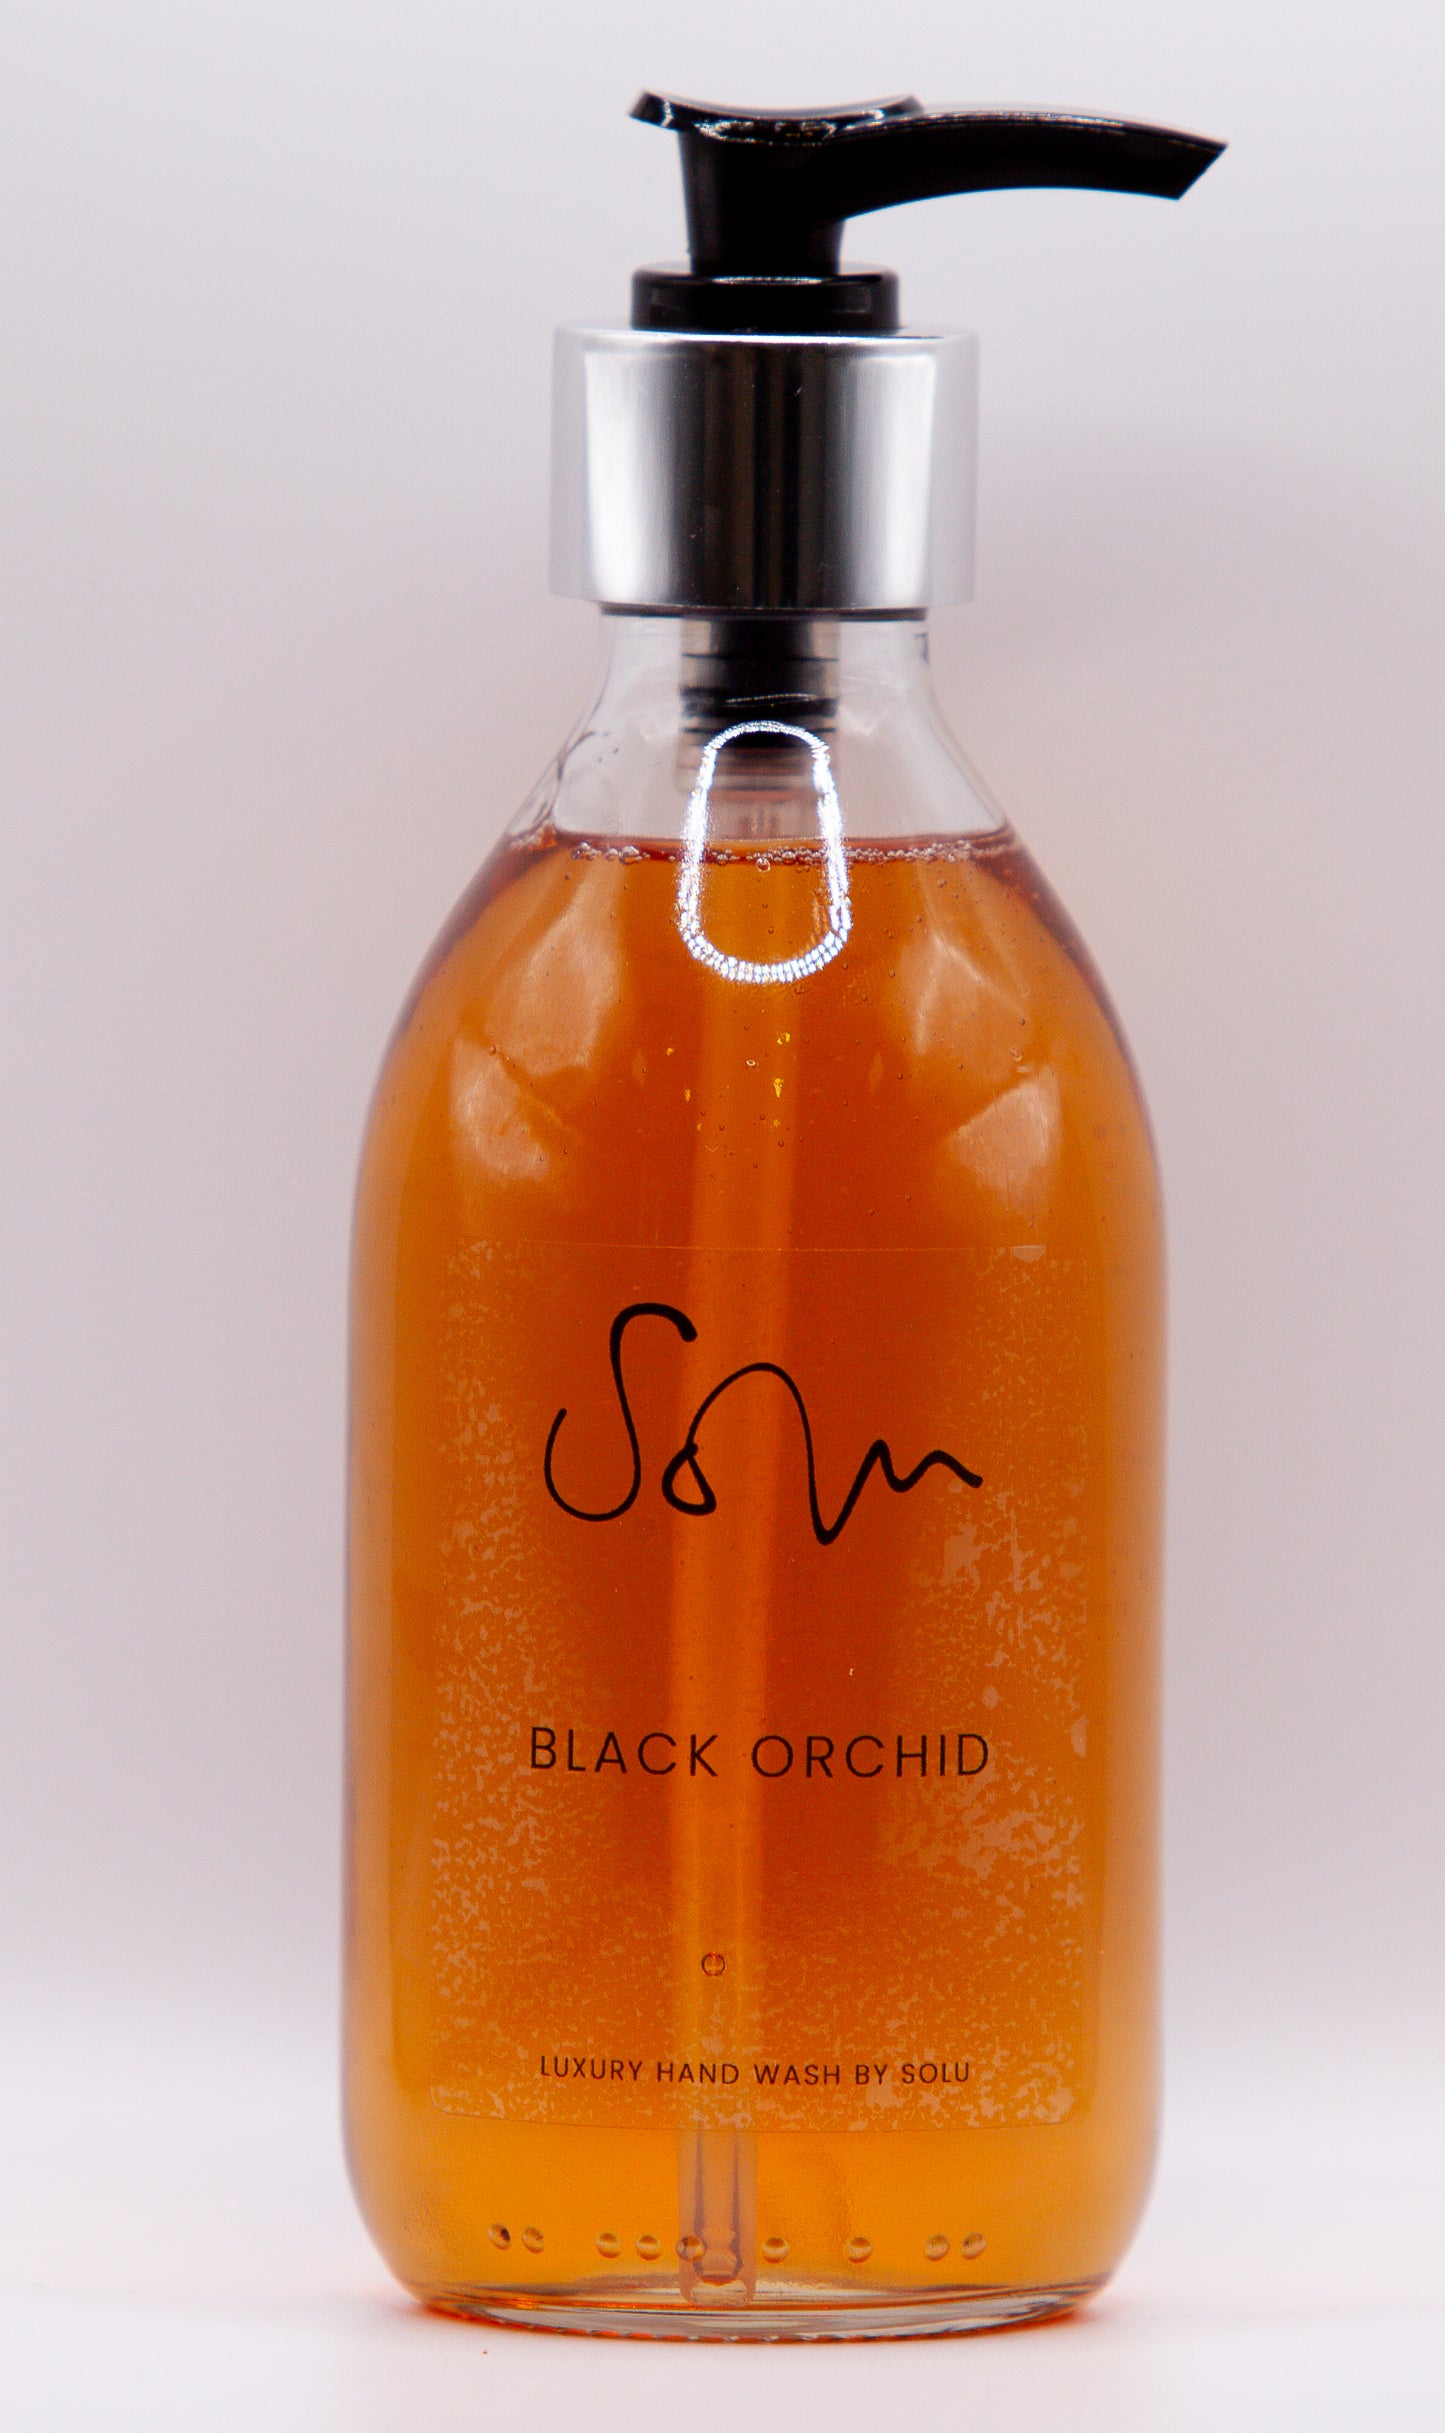 Black Orchid Luxury Hand Wash - Solu Candles